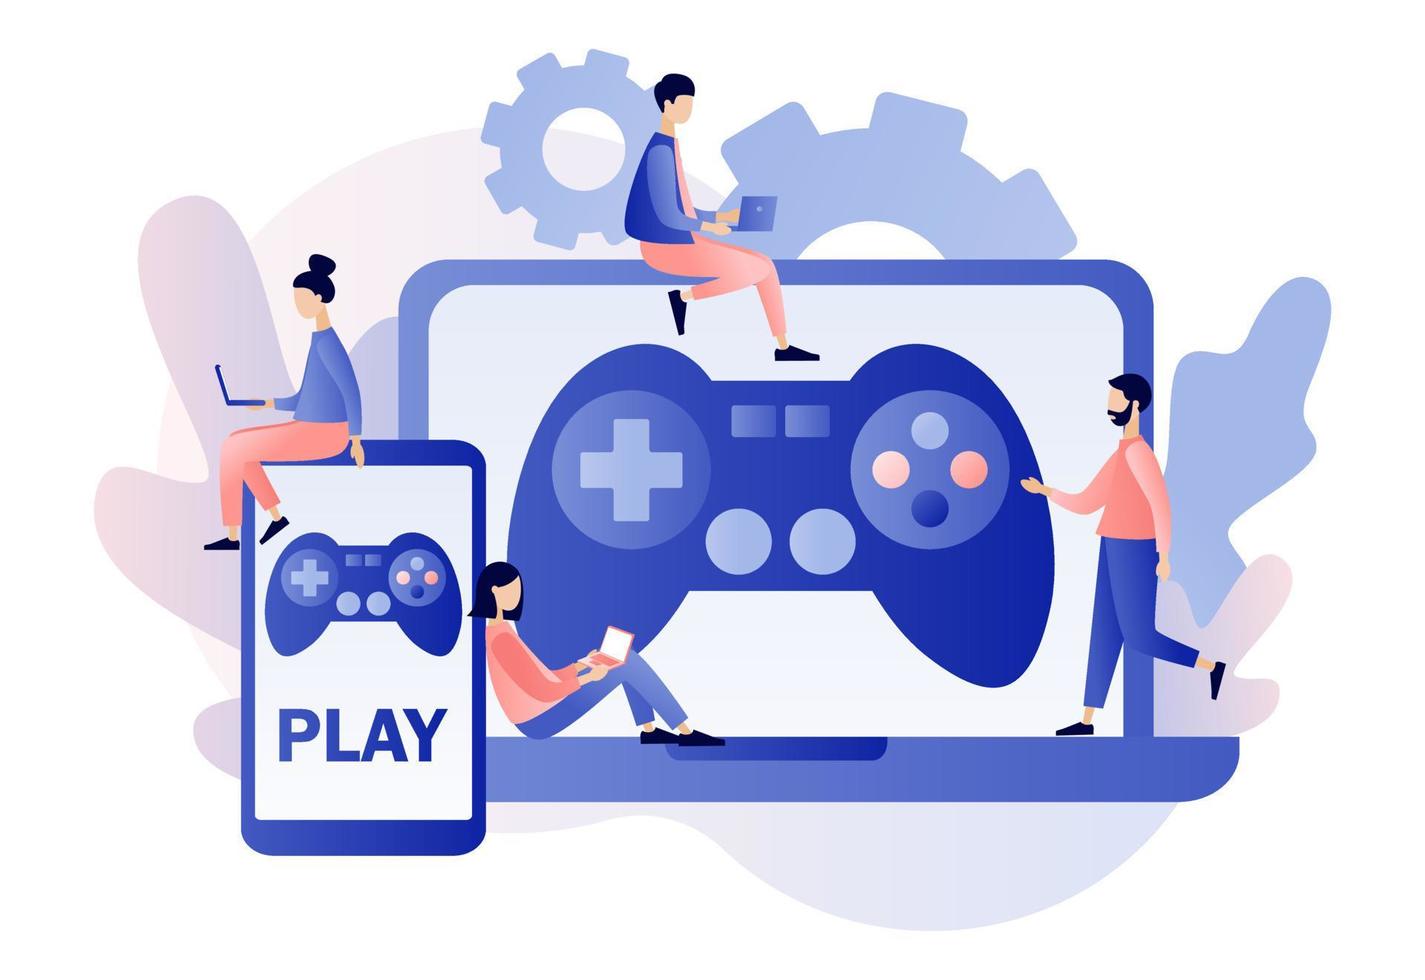 Gaming concept. People gamers playing online video game. Modern flat cartoon style. Vector illustration